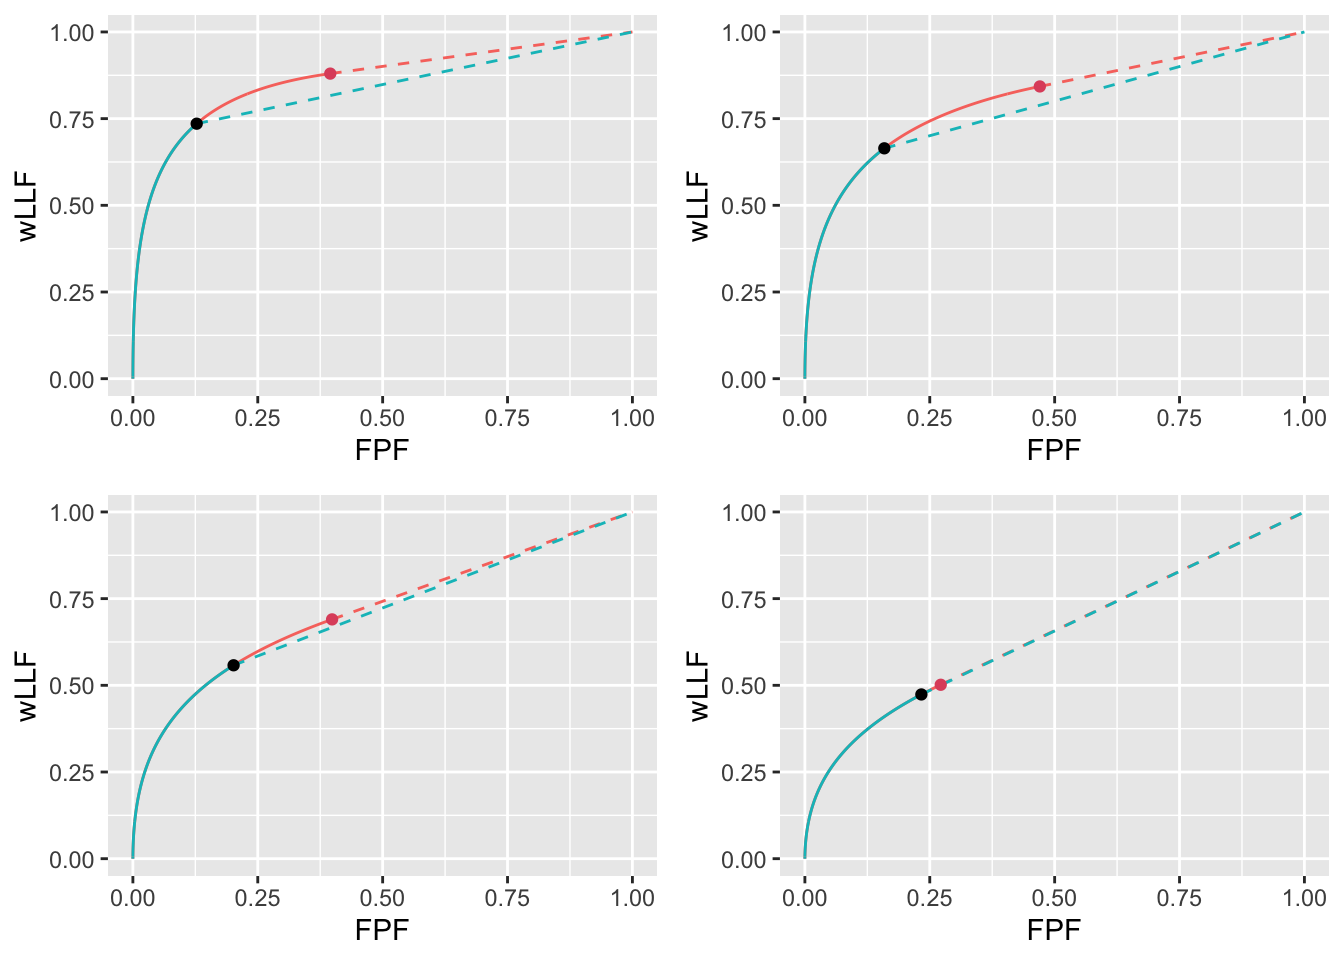 wAFROC plots for the two optimization methods: the "solid-green solid-red dashed-red" curve corresponds to $\text{wAFROC}_\text{AUC}$ optimization and the "solid-green dashed-green" curve corresponds to Youden-index optimization. The $\text{wAFROC}_\text{AUC}$ optimizations yield greater performance than do Youden-index optimizations and the difference decreases with increasing $\lambda$.